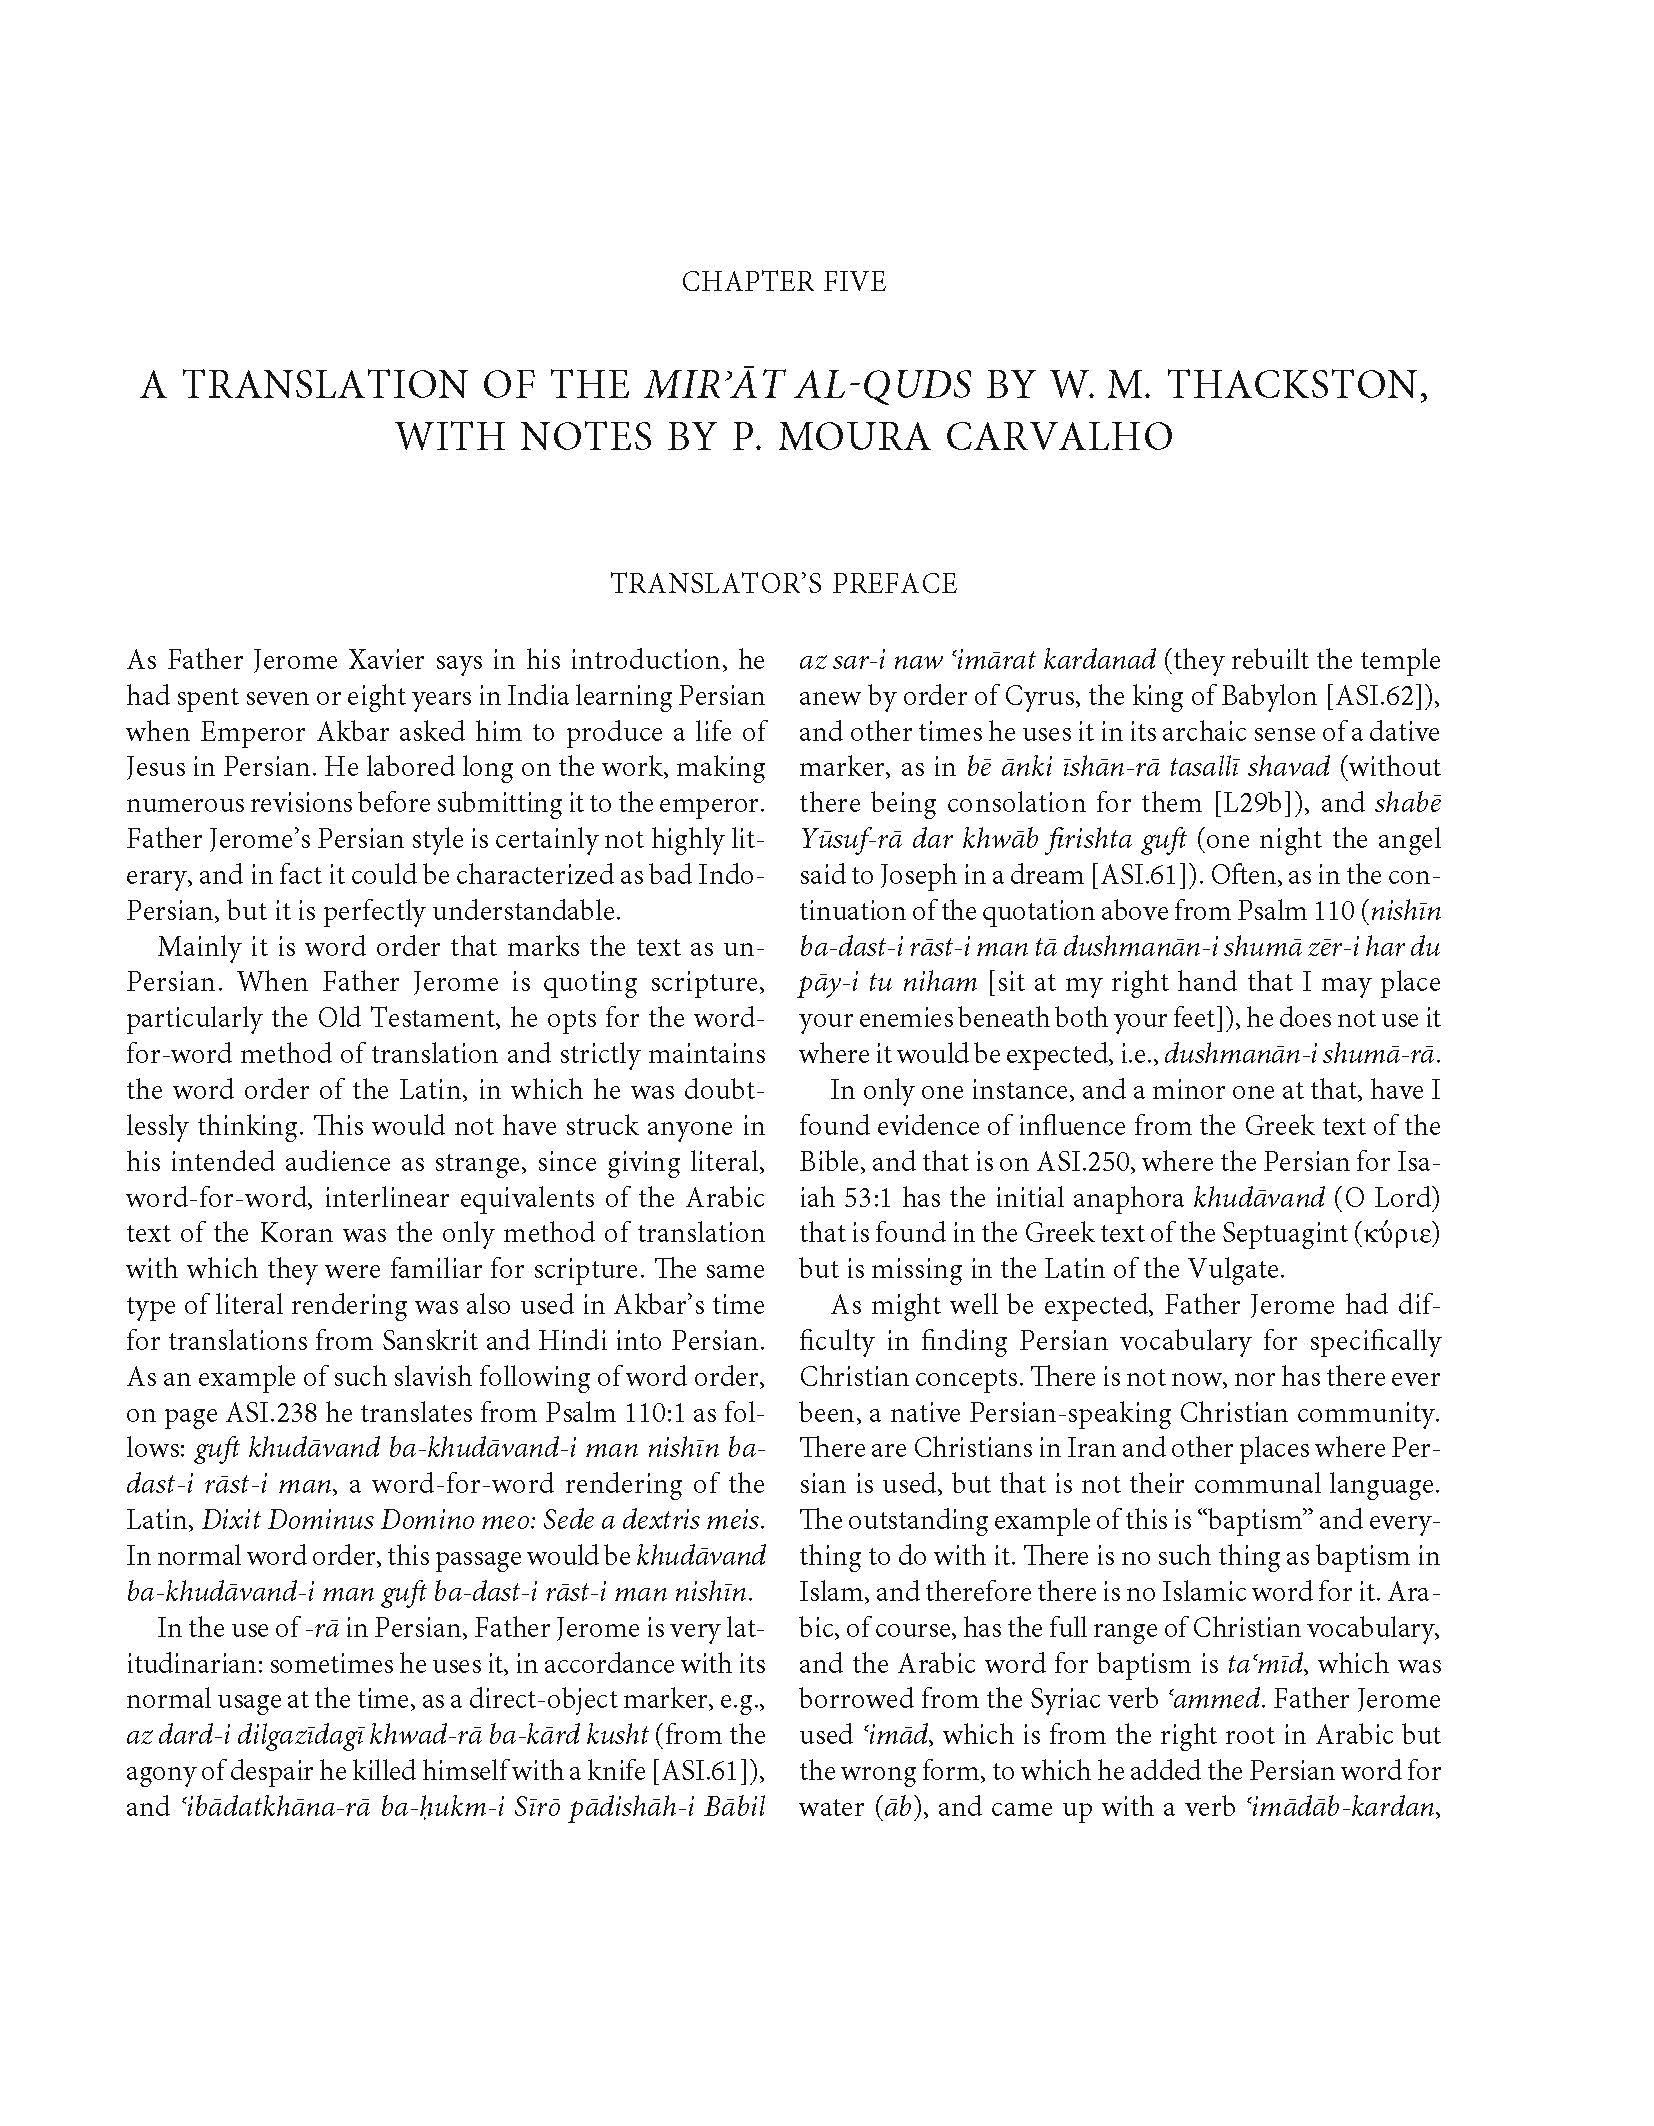 Wheeler Thackston - Chapter Five of&nbsp;<span style="font-style: italic;">Mir’āt al-quds (Mirror of Holiness): A Life of Christ for Emperor Akbar.&nbsp;</span>This study examines the&nbsp;<span style="font-style: italic;">Mir'at al-Quds (Mirror of Holiness)</span>, an account of the life of Christ written by a Jesuit missionary to the court of Mughal Emperor Akbar, who took an interest in Christianity. Three illustrated copies exist, the most important of which is in the Cleveland Museum of Art and forms the basis of this study. The text, originally in Persian, is translated to English for the first time by Wheeler M. Thackston. Chapter Five contains an annotated translation of the Persian text of Mir'at al-Quds by Wheeler M. Thackston with commentary by Pedro Carvalho. This study is part of the series&nbsp;<span style="font-style: italic;">Studies and Sources on Islamic Art and Architecture: Supplements to Muqarnas</span>, Volume XII.